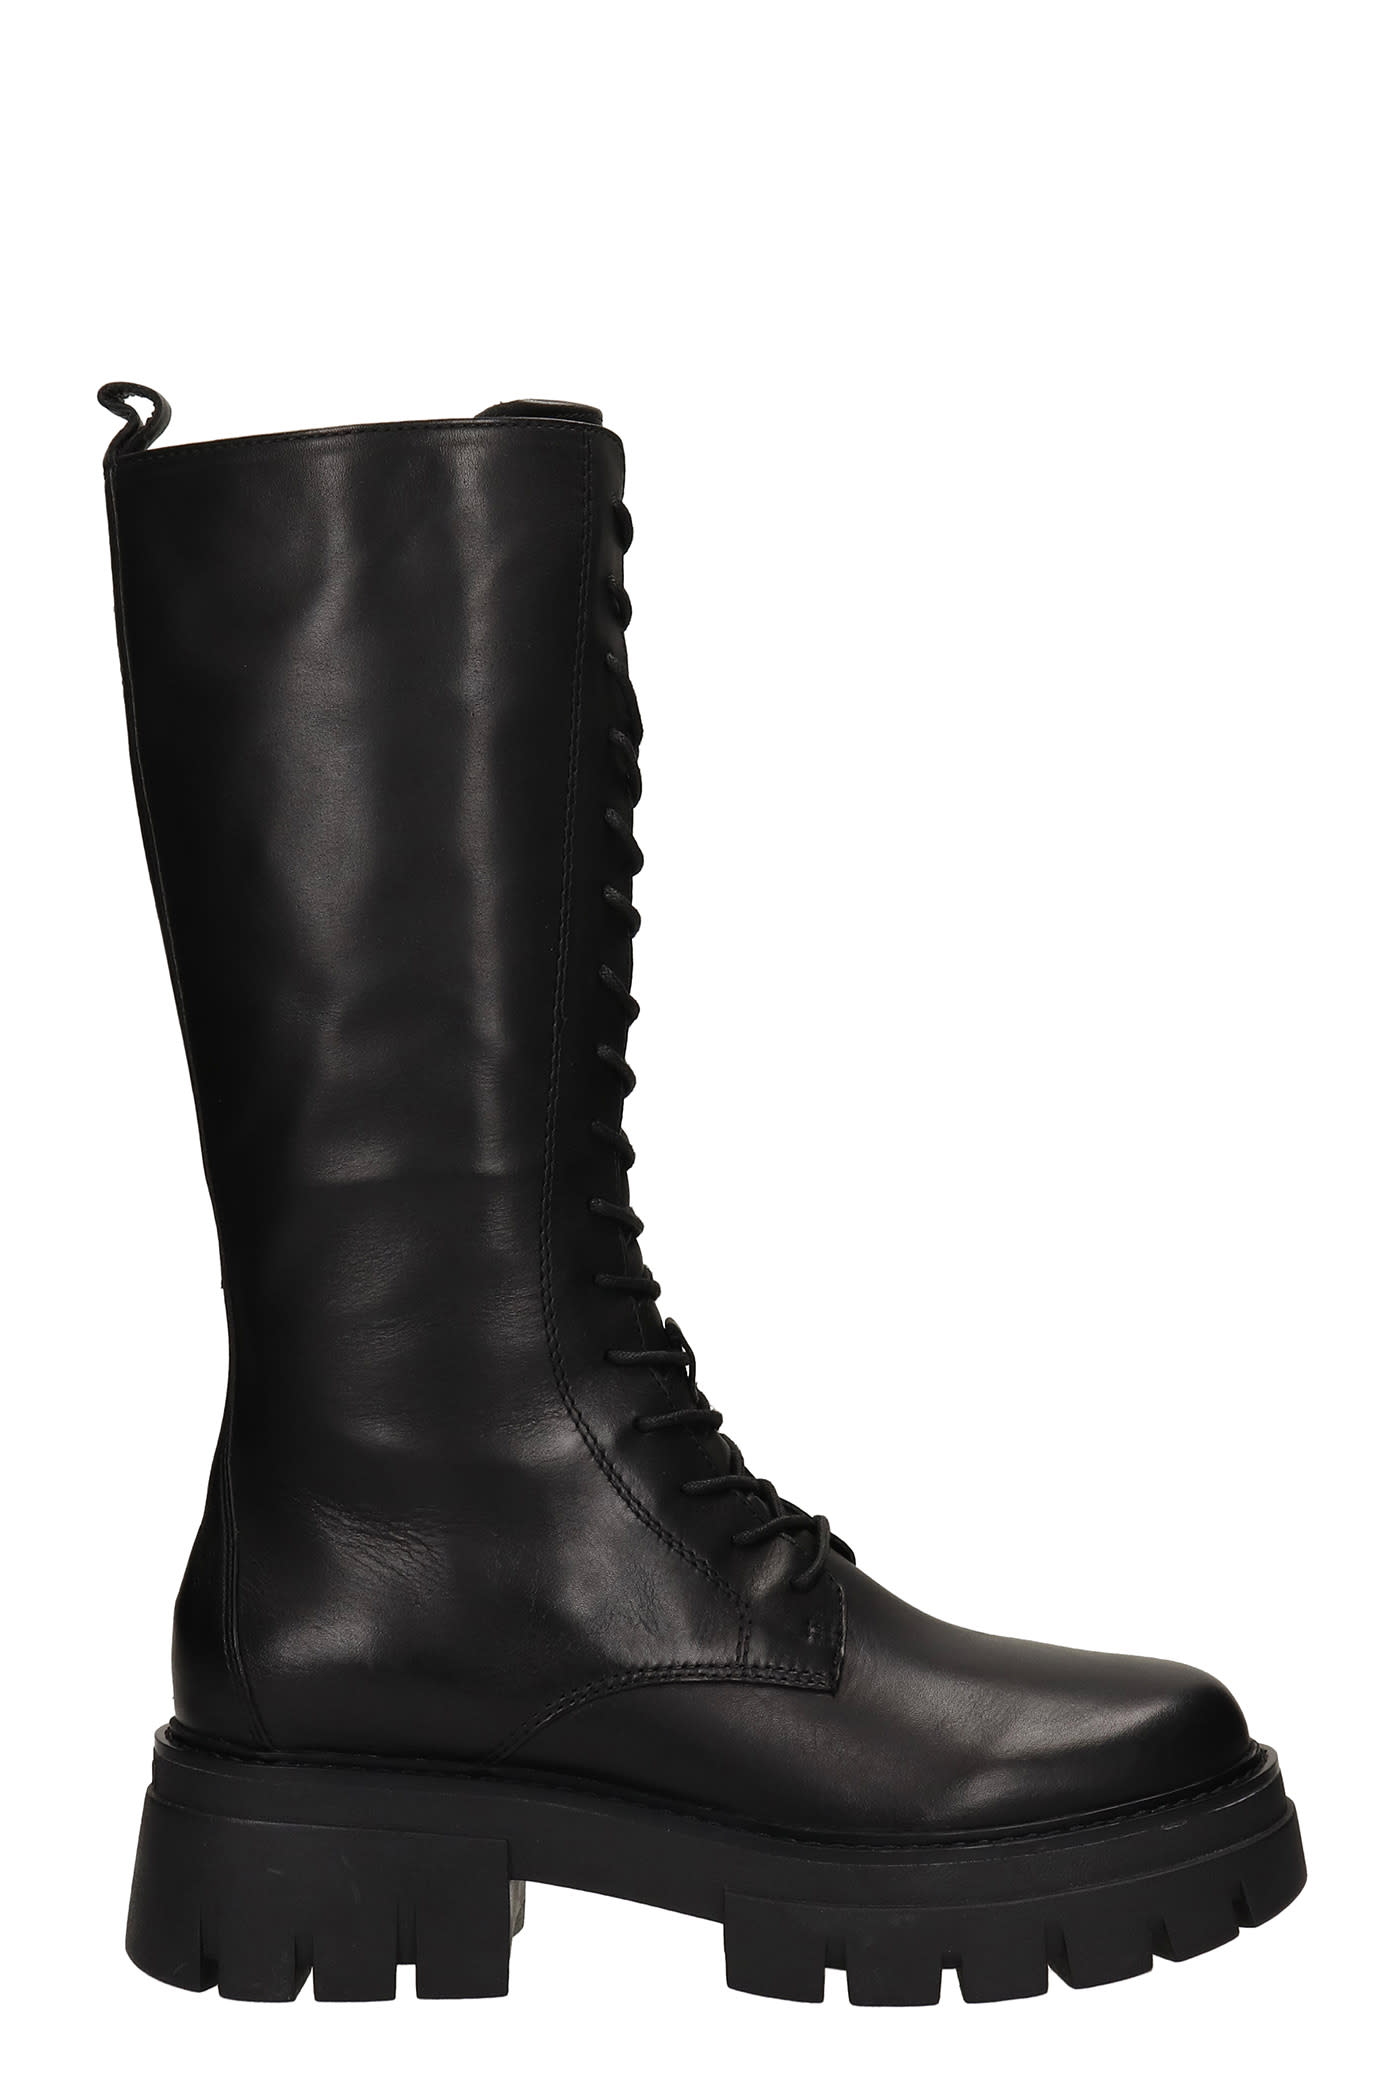 Ash Lullaby Combat Boots In Black Leather